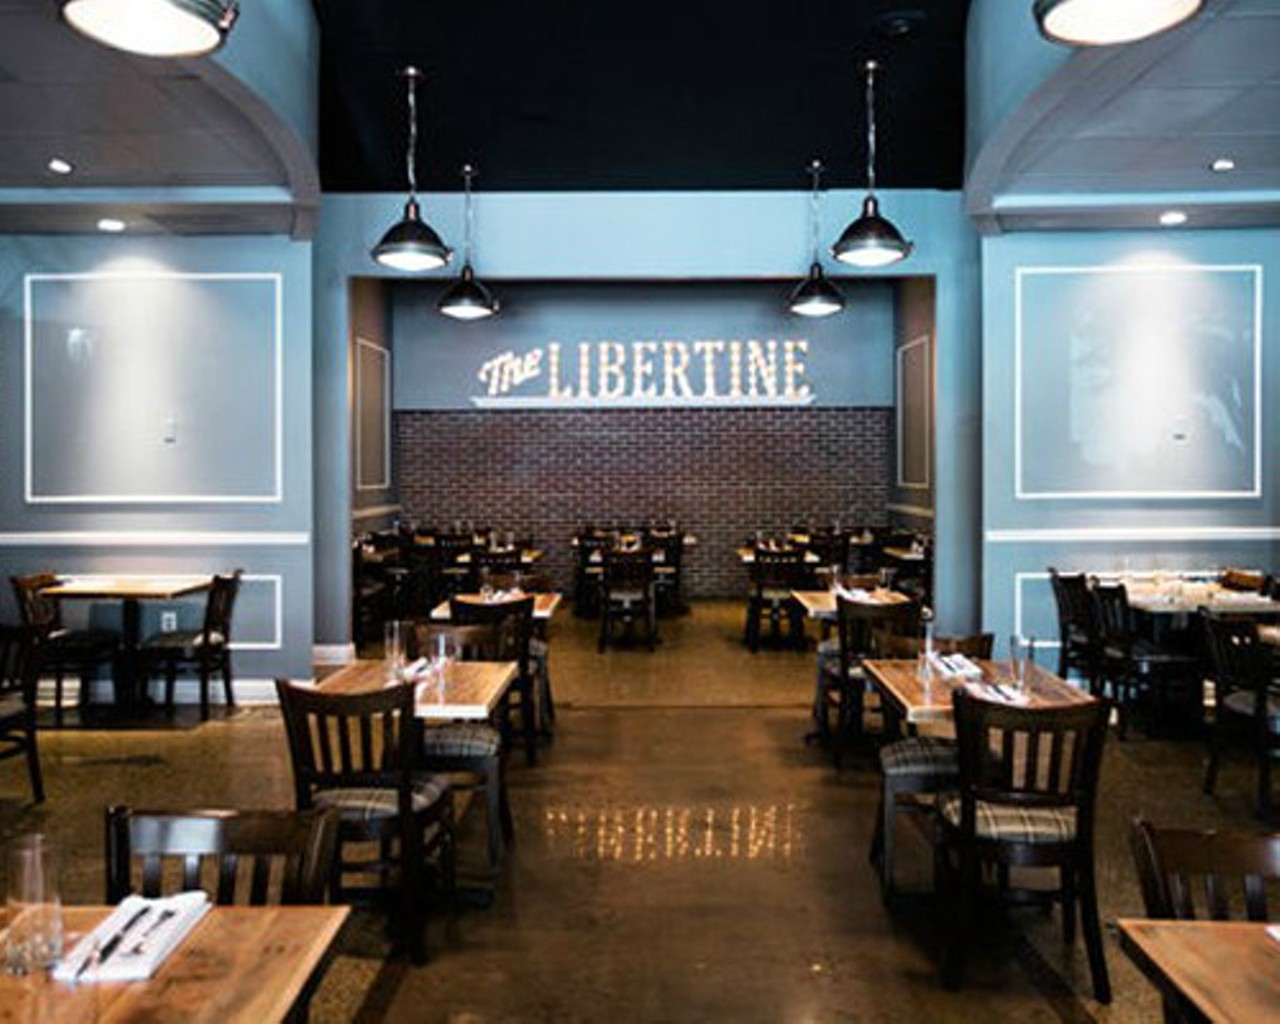 The Libertine
7927 Forsyth Blvd.
We once described the Libertine as having "an atmosphere that perfectly hit the sweet spot between upscale and comfortable." That was so spot-on. It was one of the best places to hit if you wanted to go out for a nice meal but didn't want to make a big production of it, either. Quality plus chill with badass cocktails.
Photo courtesy of Jennifer Silverberg